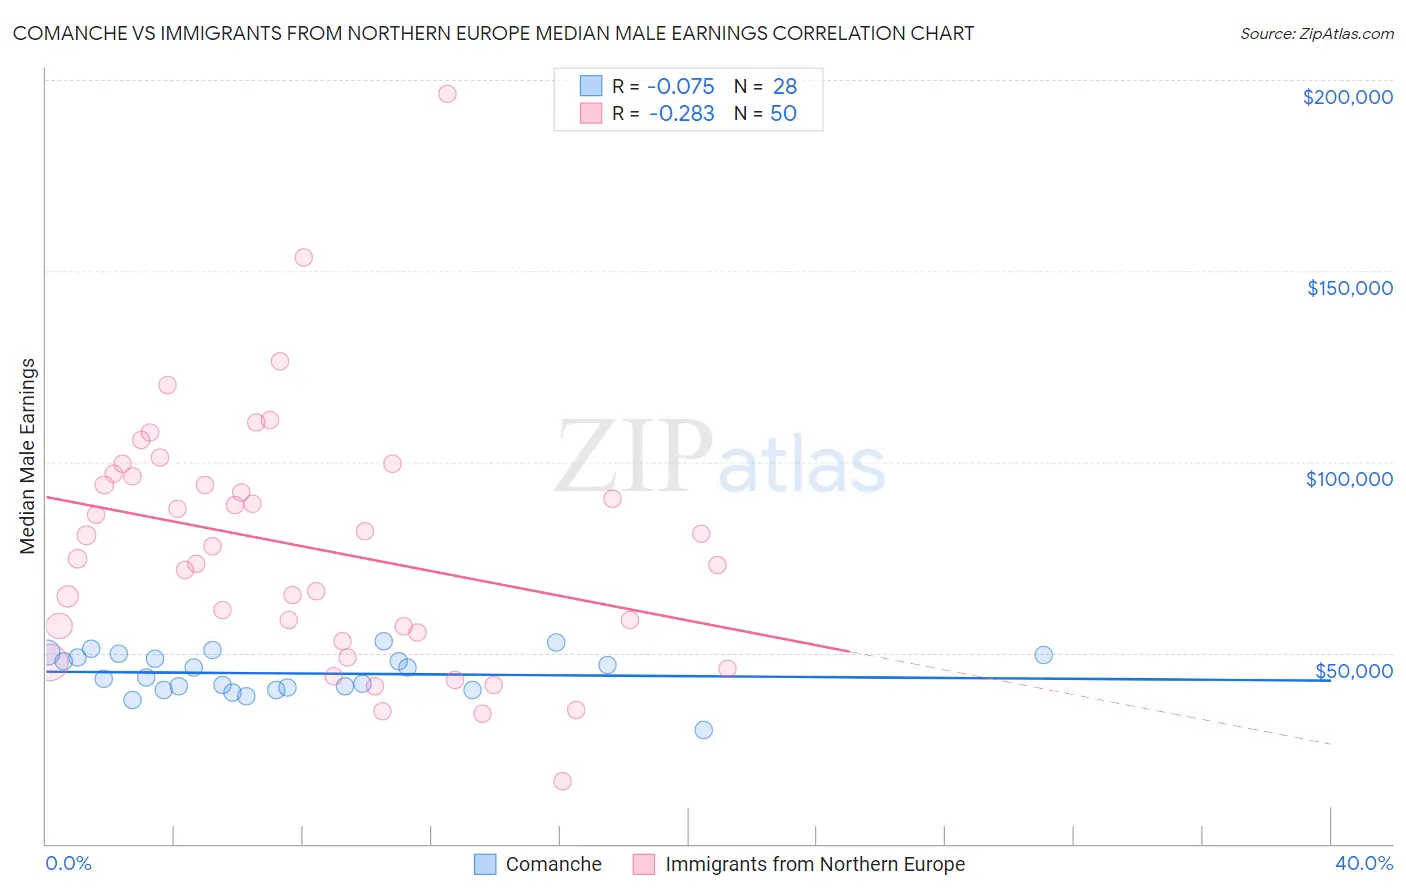 Comanche vs Immigrants from Northern Europe Median Male Earnings